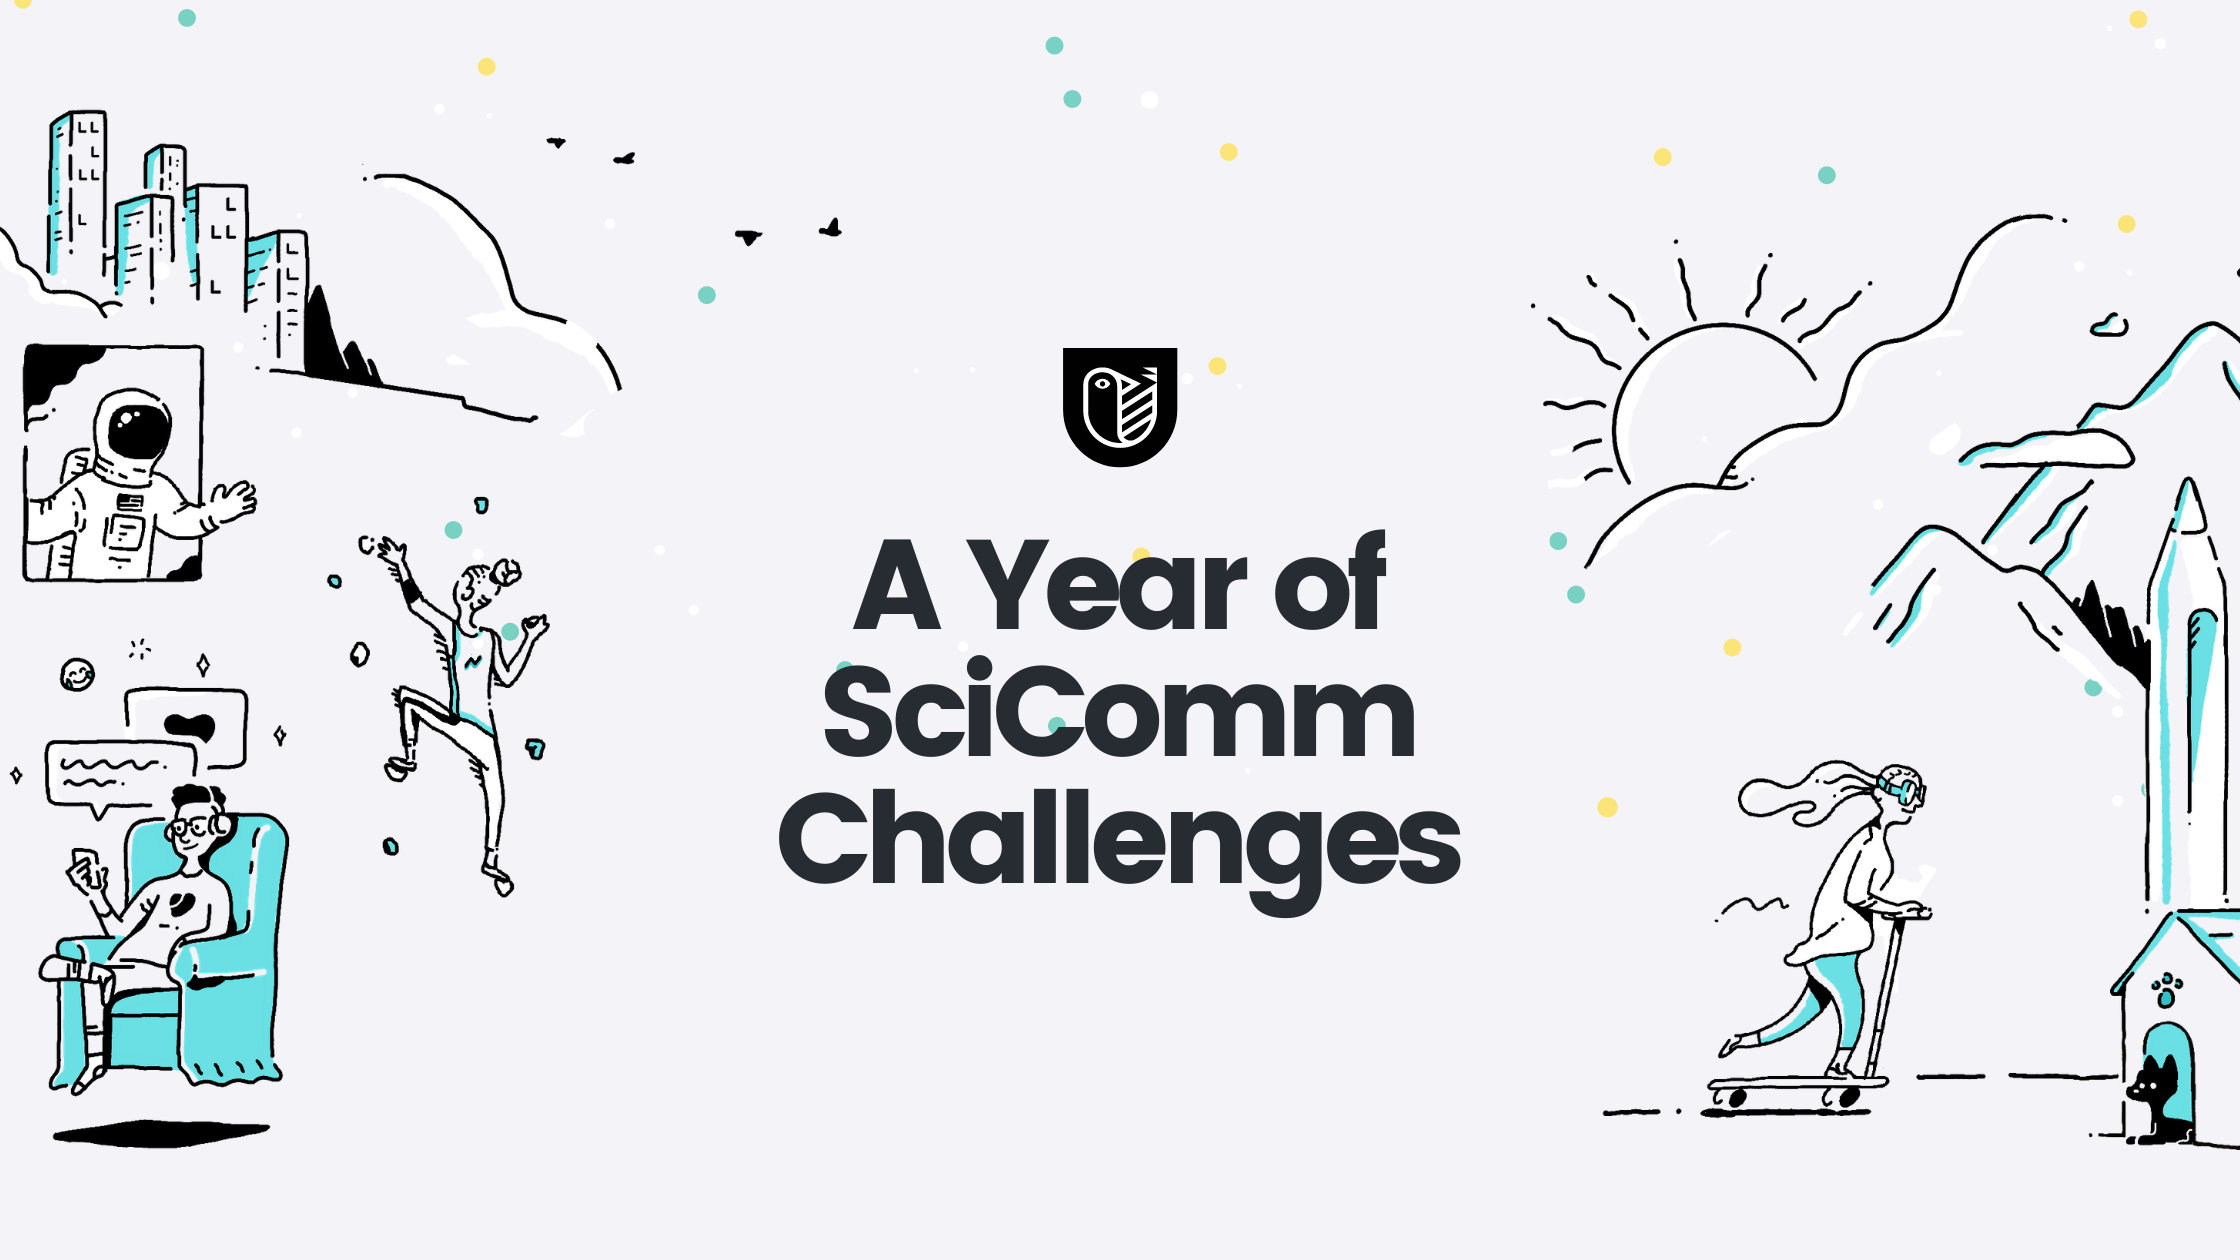 A Year of SciComm Challenges